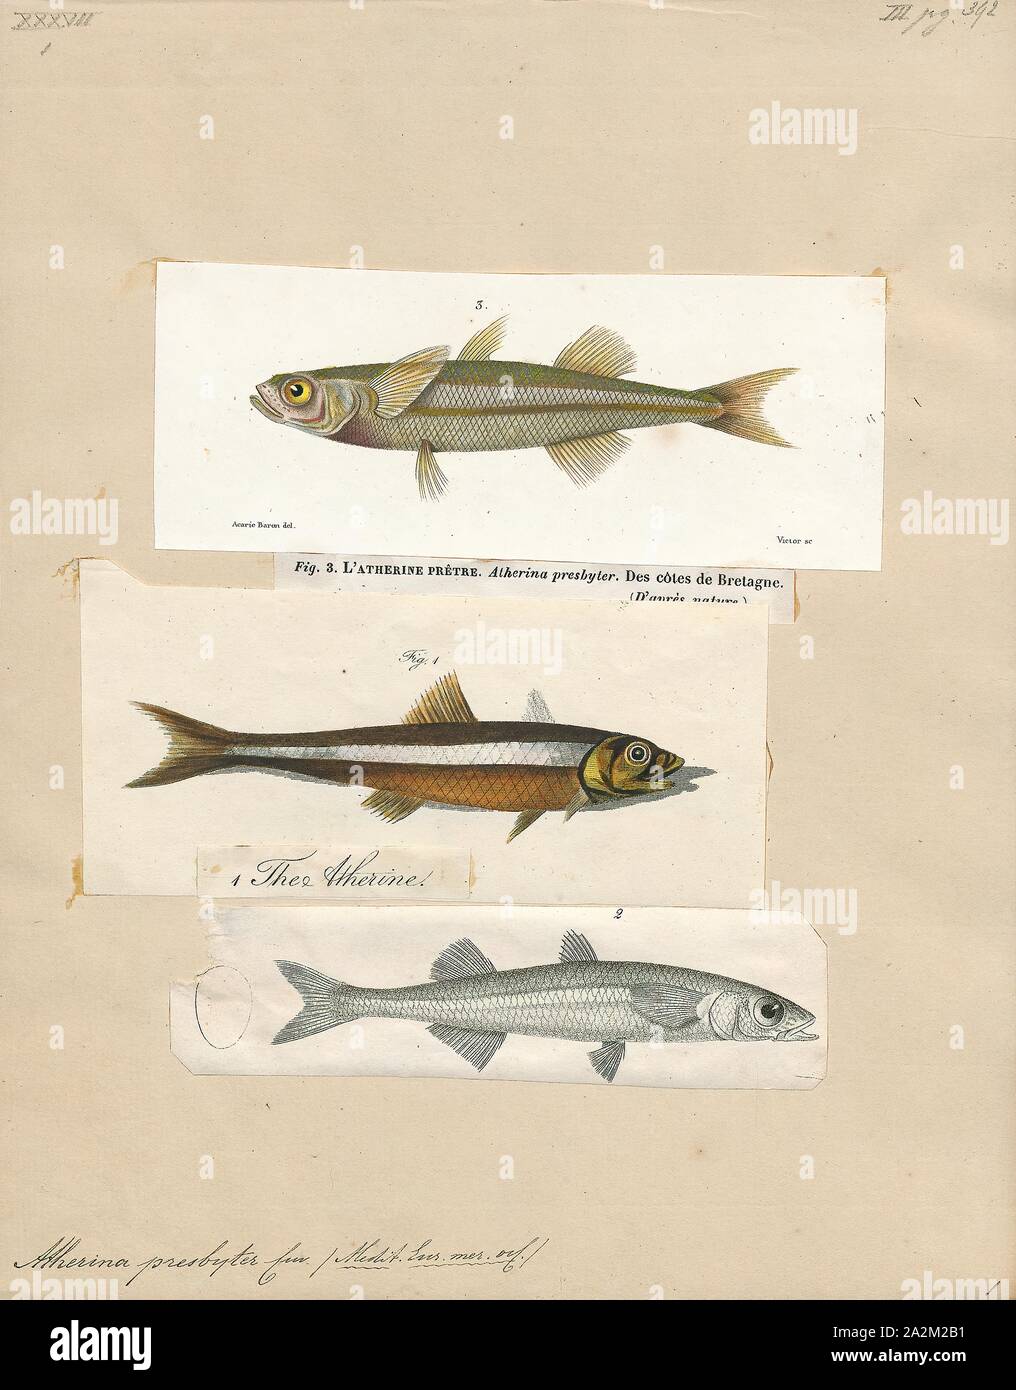 Atherina presbyter, Print, The sand smelt (Atherina presbyter) is a species of marine fish of the Atherinidae family, common in the north-eastern Atlantic from the Danish straits, where it is rare, and Scotland to the Canary Islands and the western Mediterranean Sea. Sand smelt are small, pelagic fishes which are found in coastal areas and in estuaries. They are a schooling species which undertake seasonal migrations in the Atlantic. They are carnivorous and prey on small crustaceans and fish larvae. Reproduction takes place in the spring and summer, in the North Sea and the English Channel Stock Photo